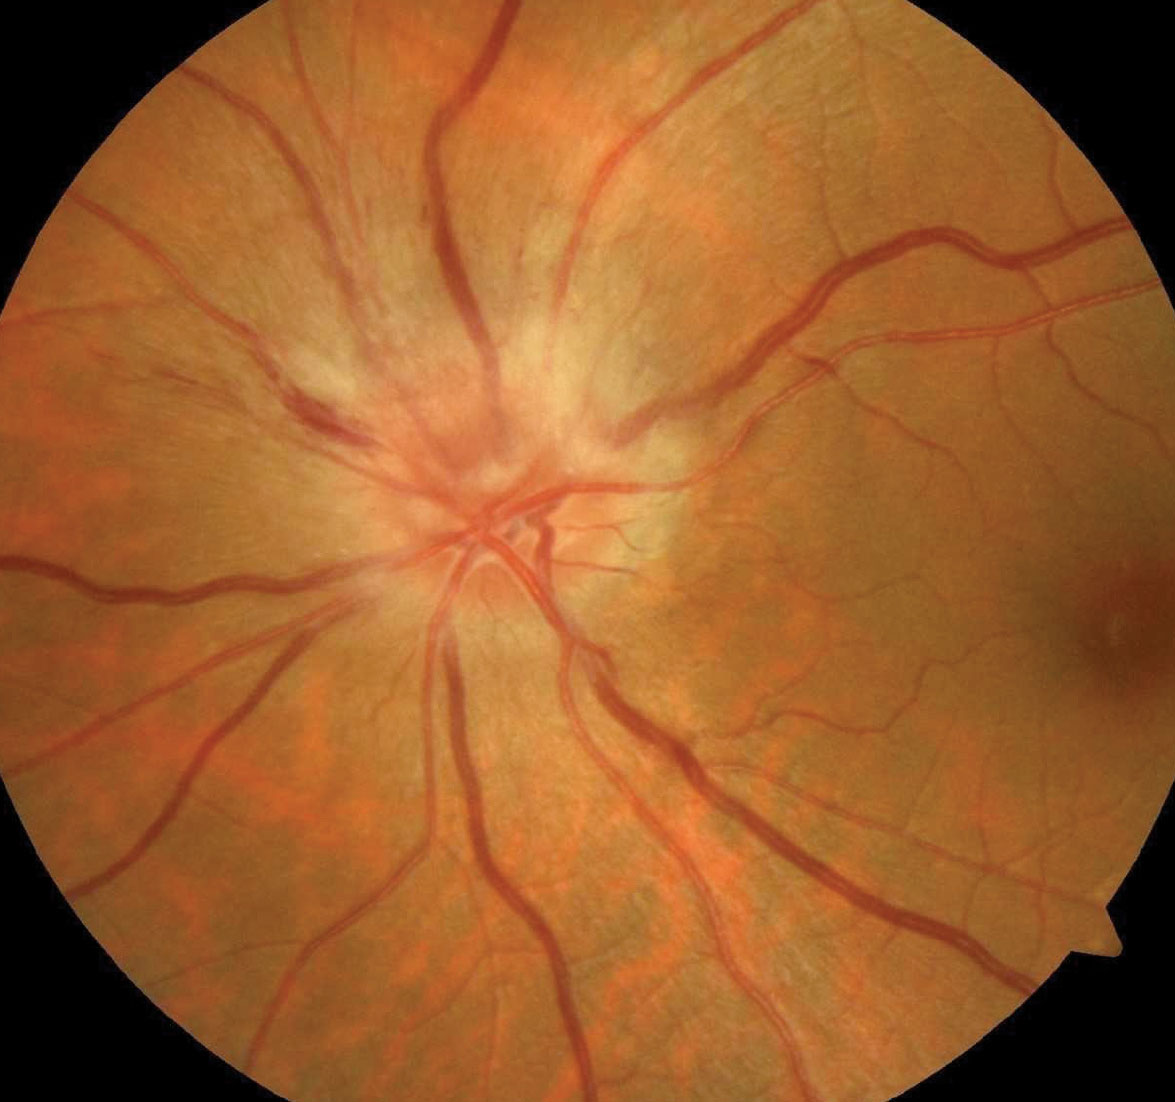 Diabetes, greater initial VF damage and severe sleep apnea were found to be risk factors for fellow eye involvement in NAION.